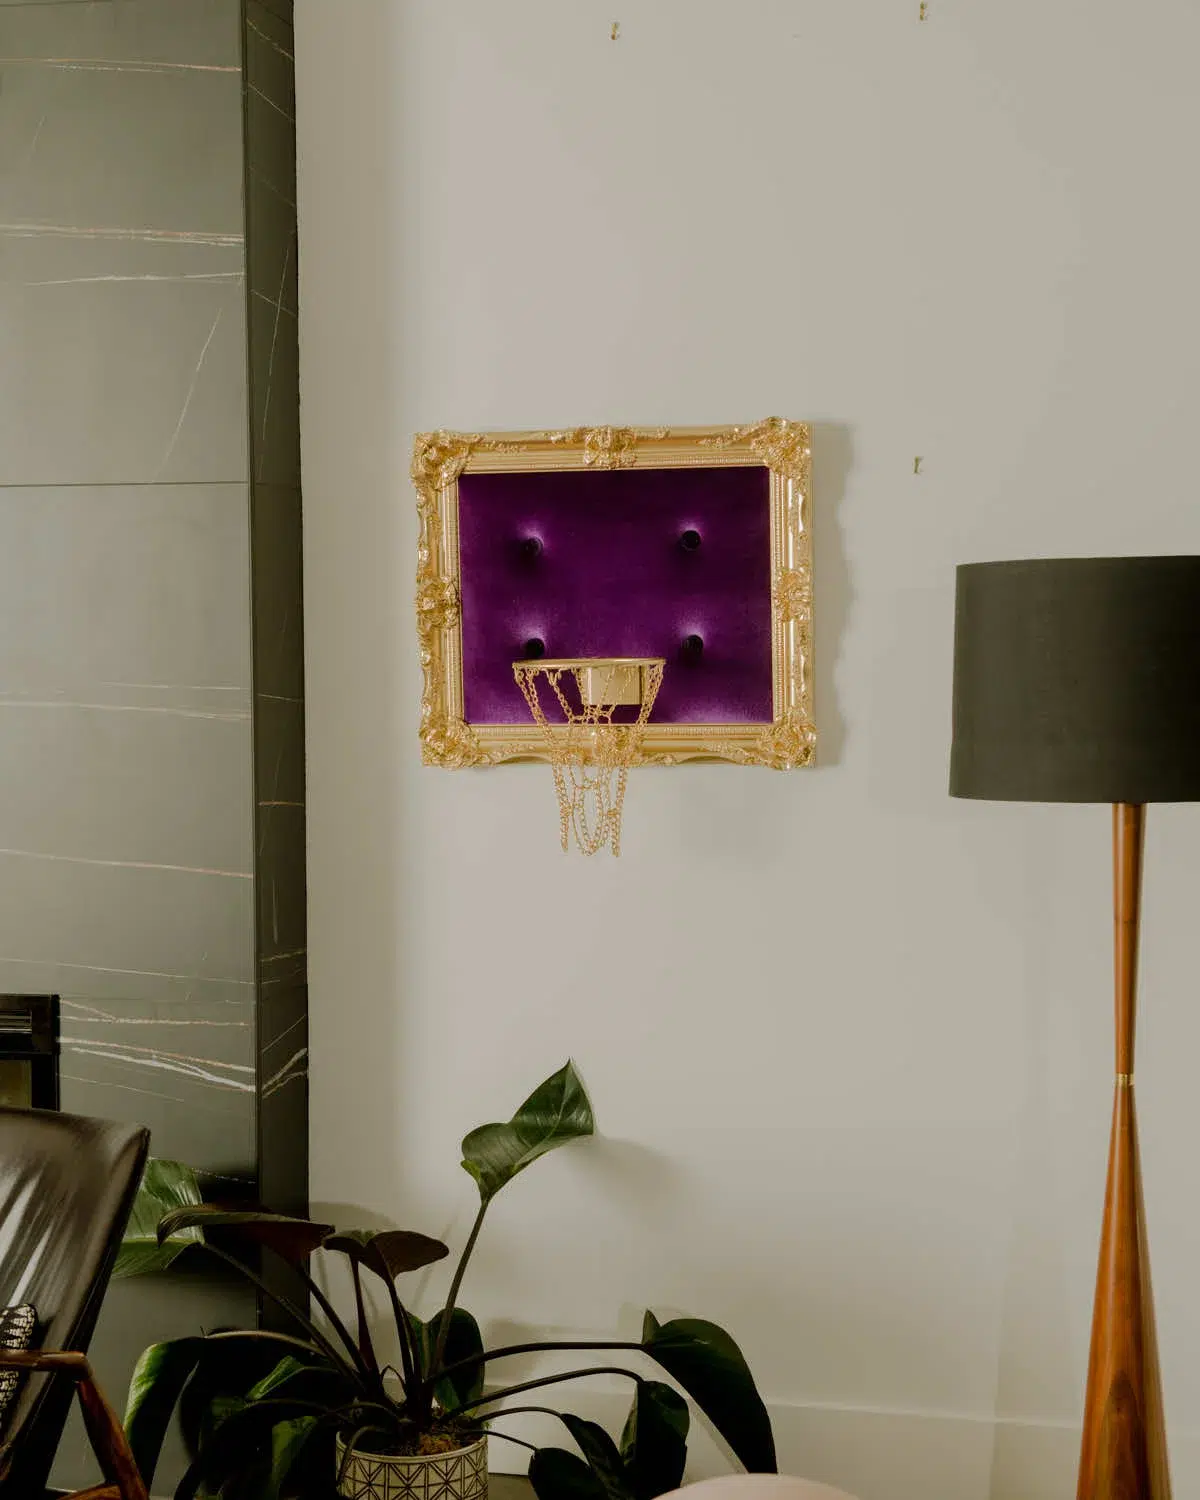 A regal hoop decorates the wall of a living room, adorned in luxurious purple velvet.